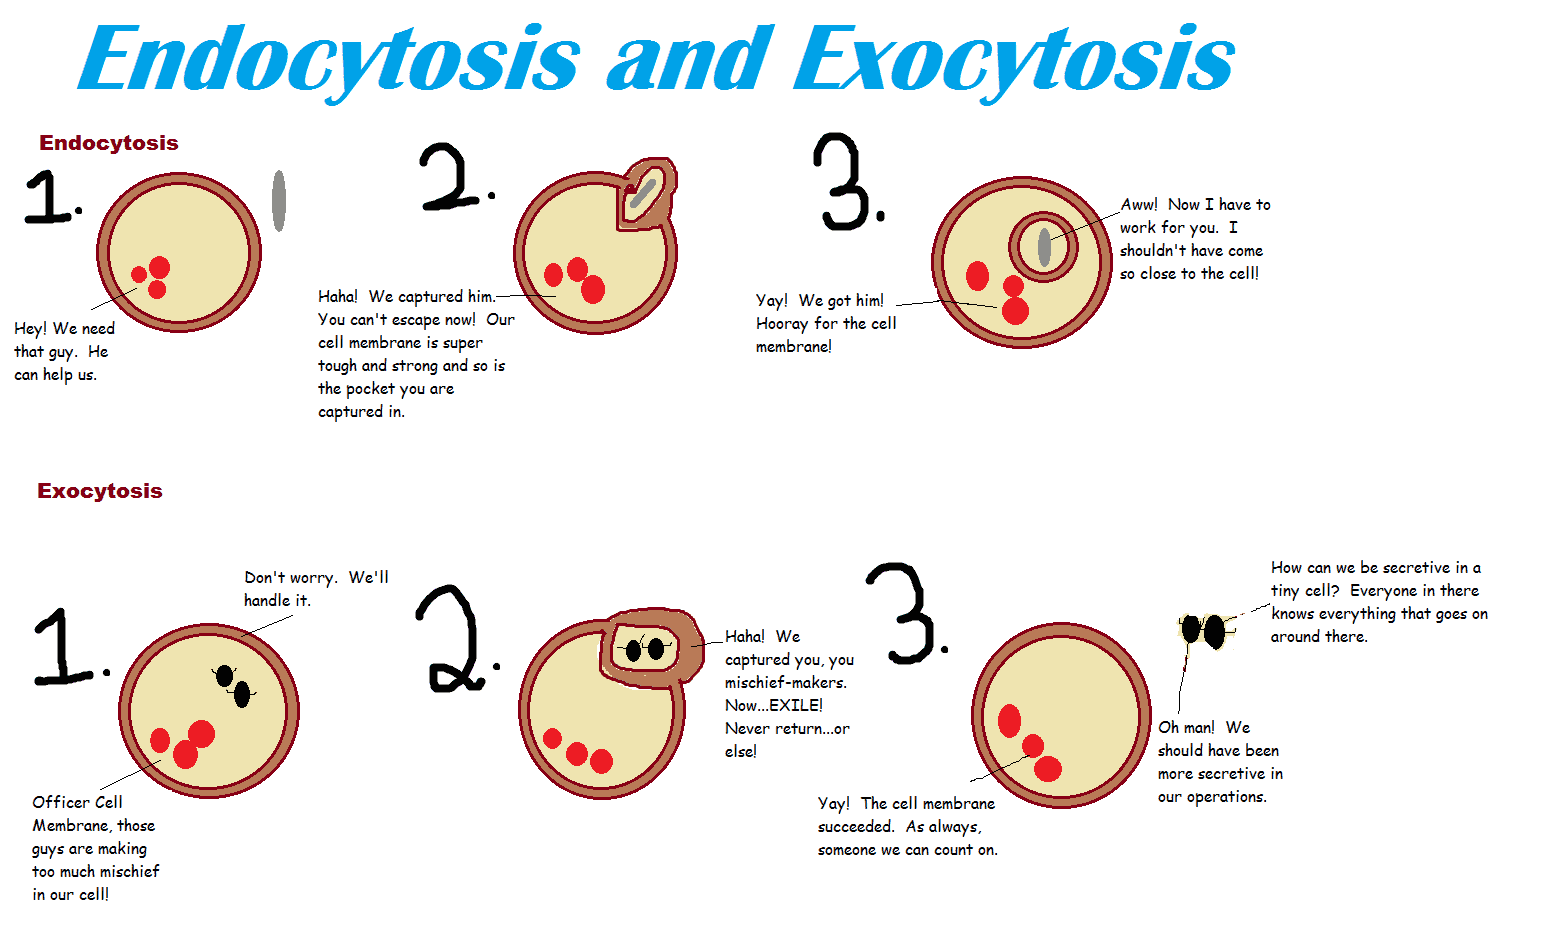 Difference Between Endocytosis and Exocytosis | Endocytosis vs Exocytosis